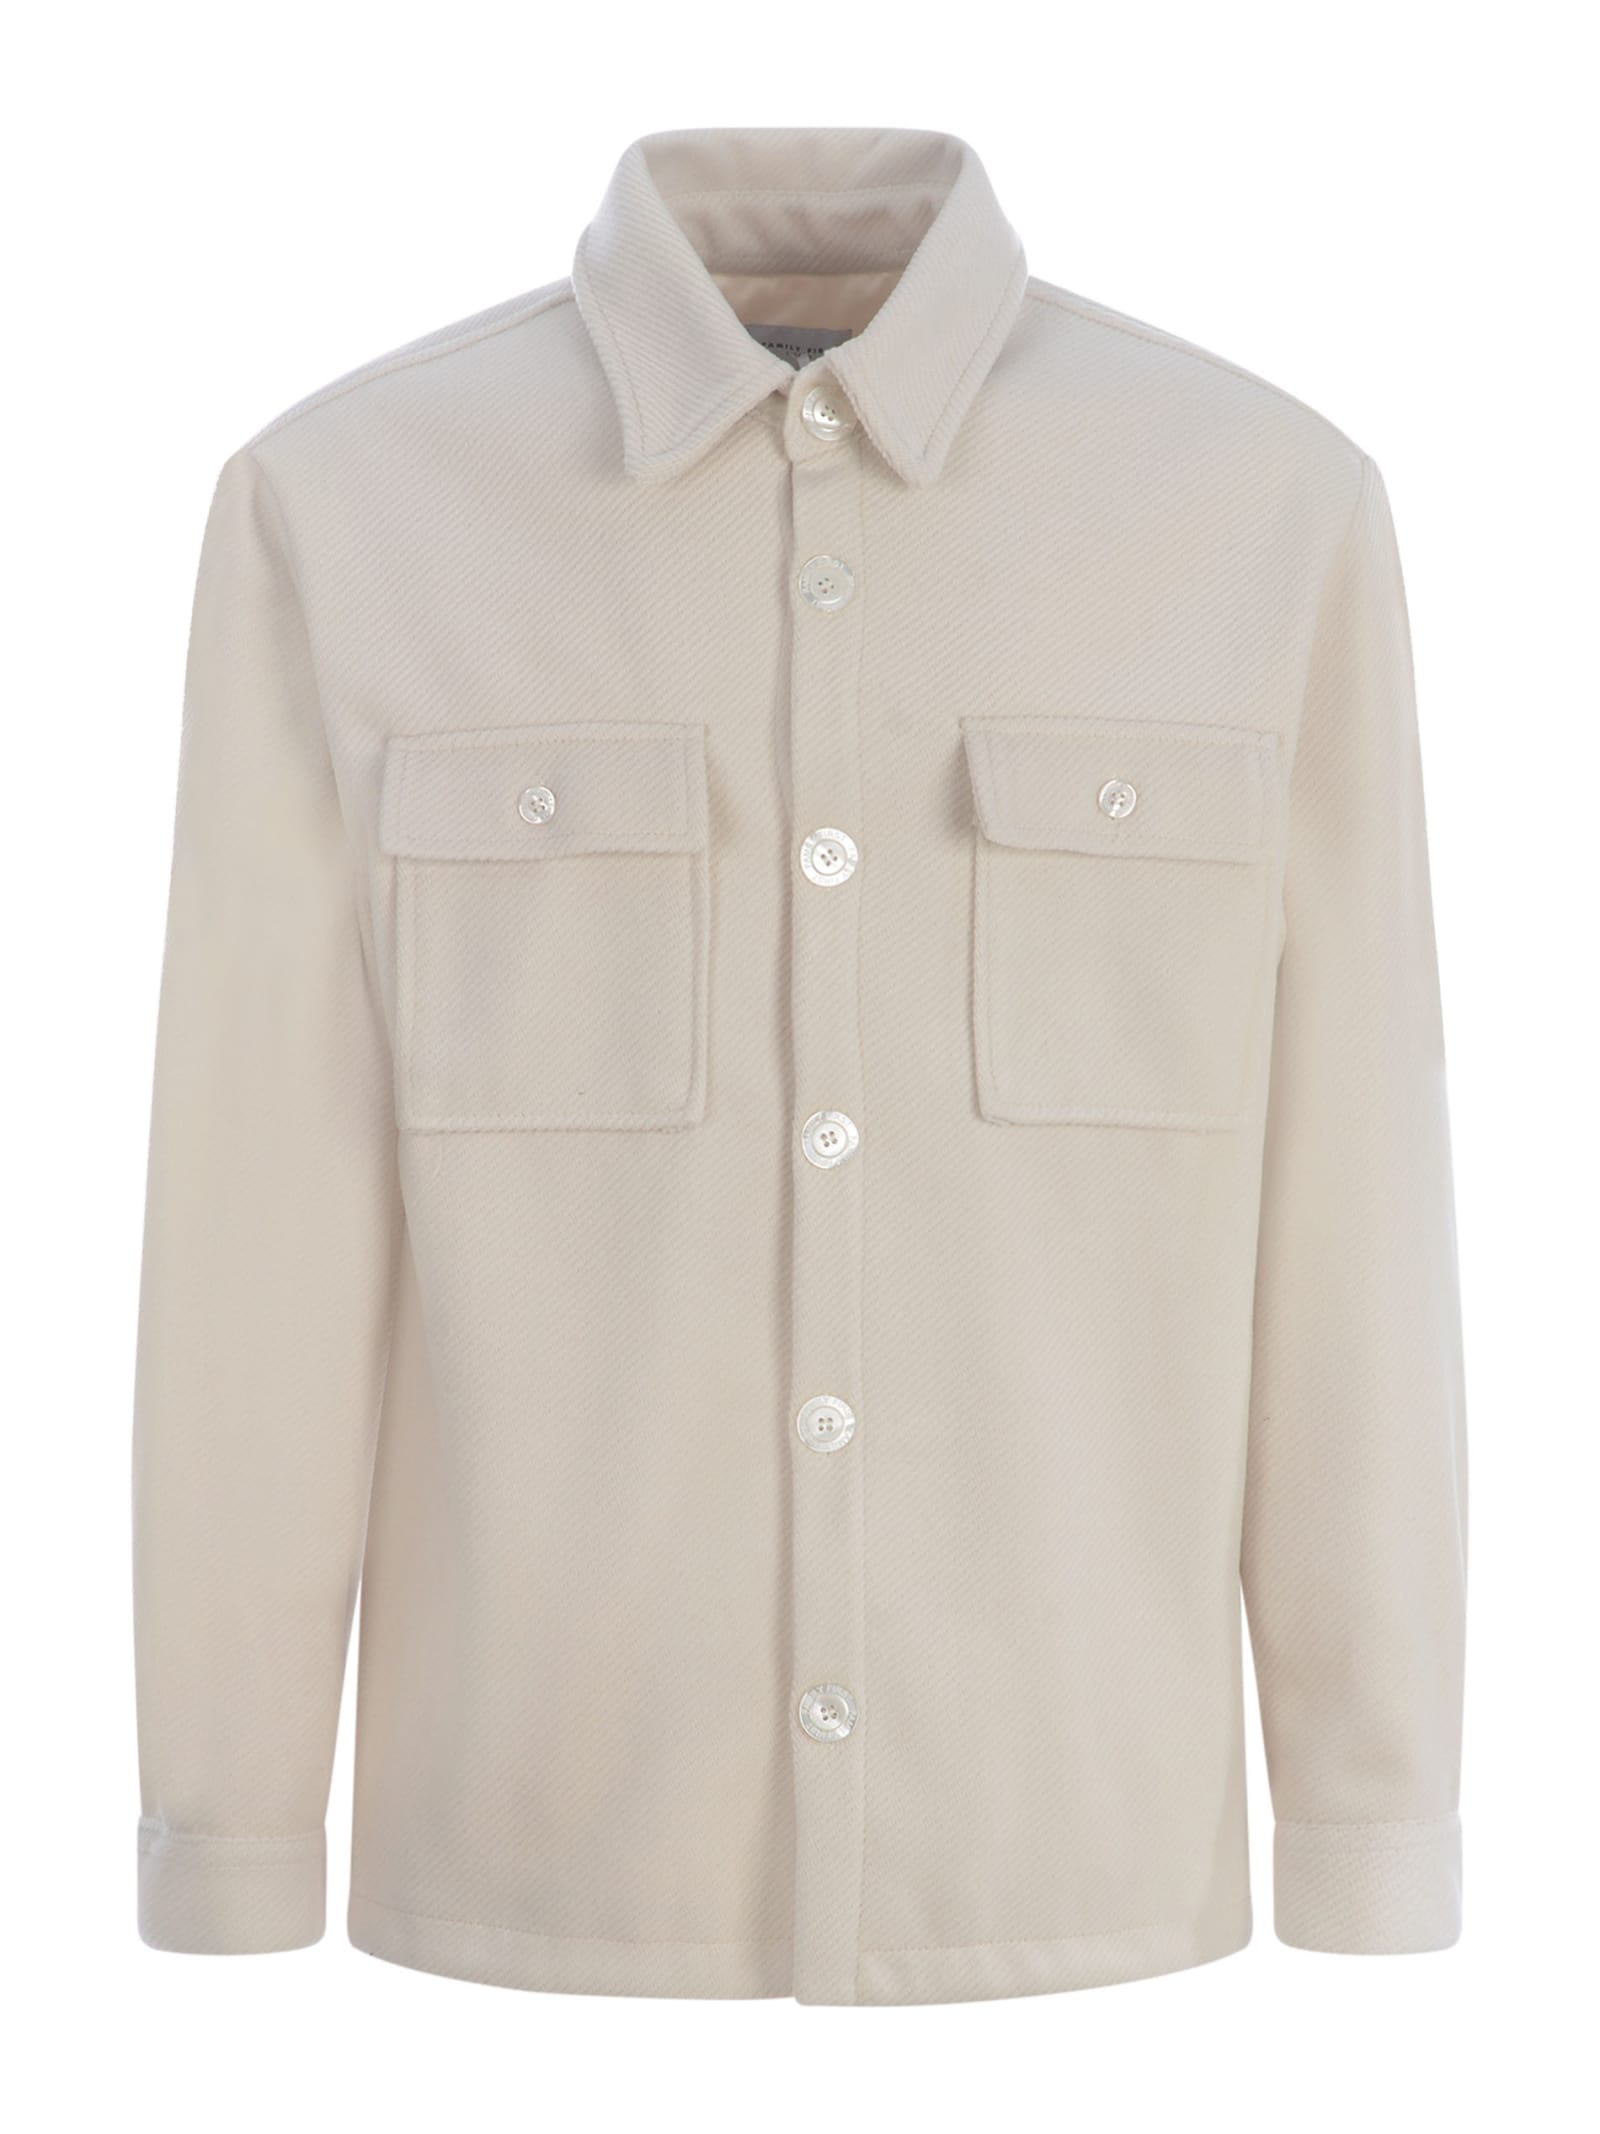 Family First Milano Shirt Jacket Family First In Terry Fabric In Crema